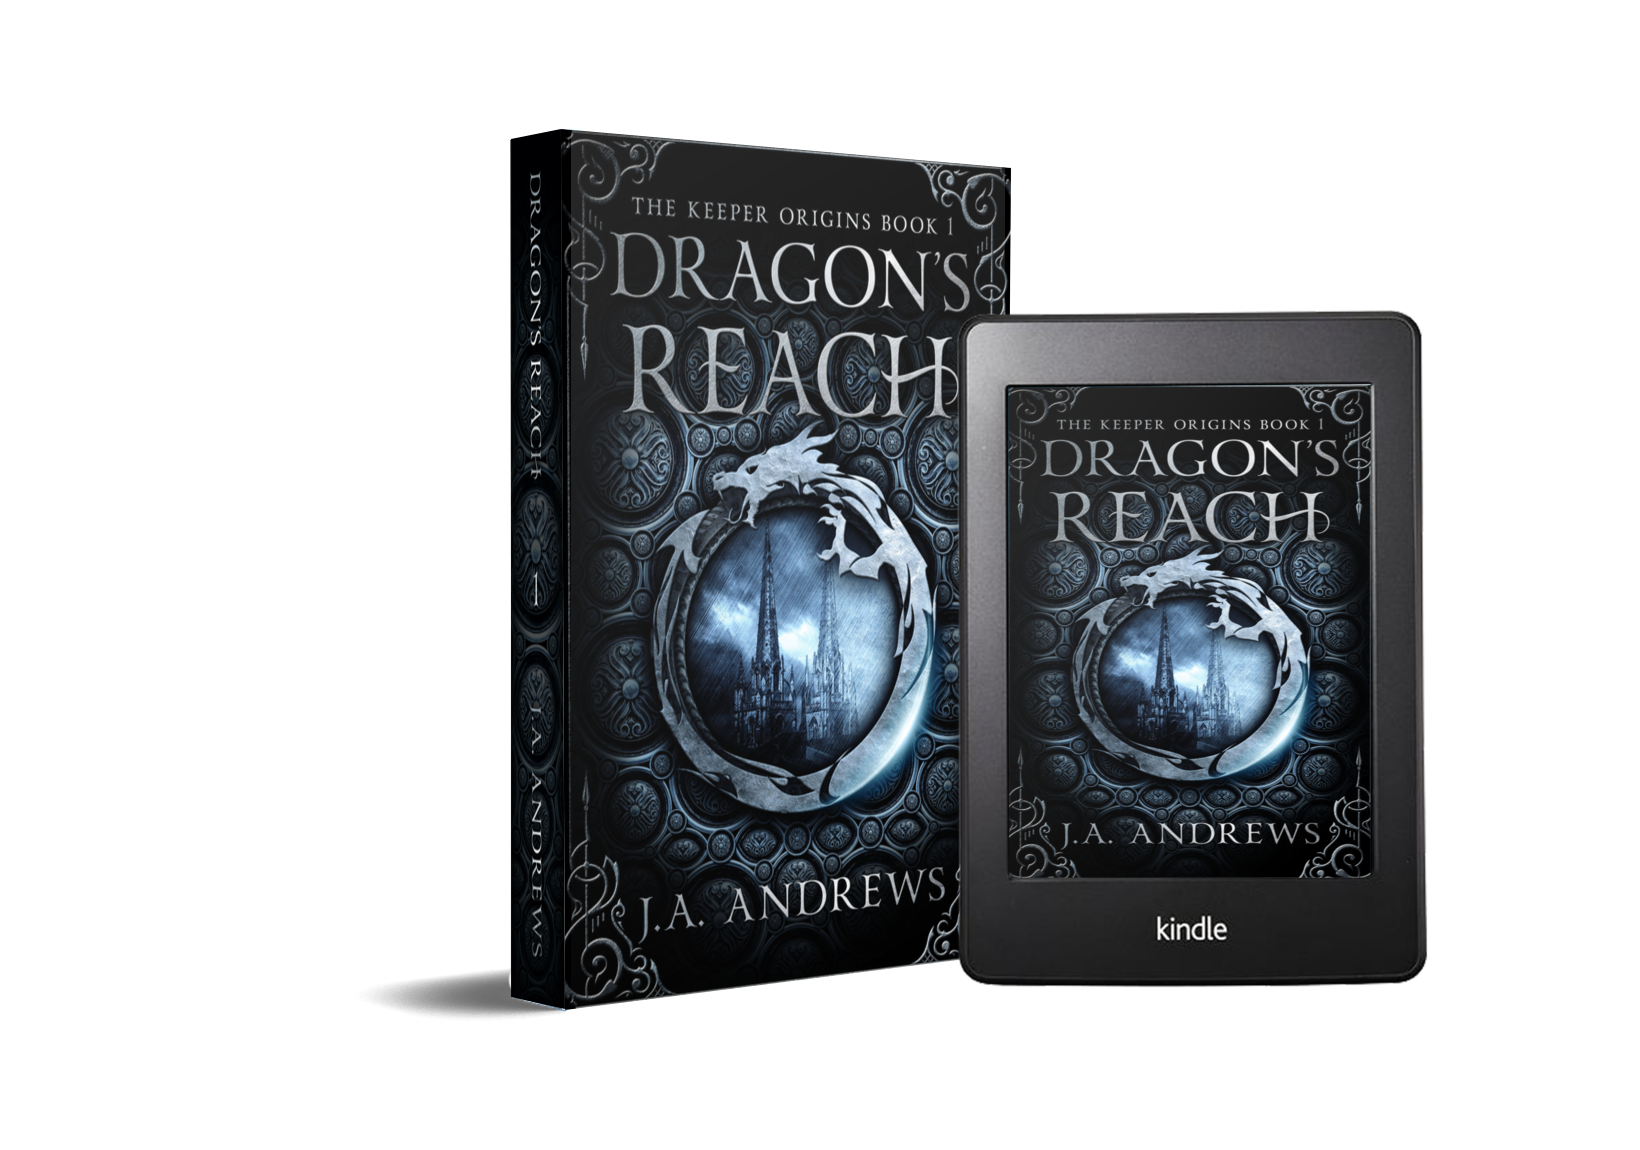 Dragon’s Reach is LIVE! (and a fun intro through promotional images…)